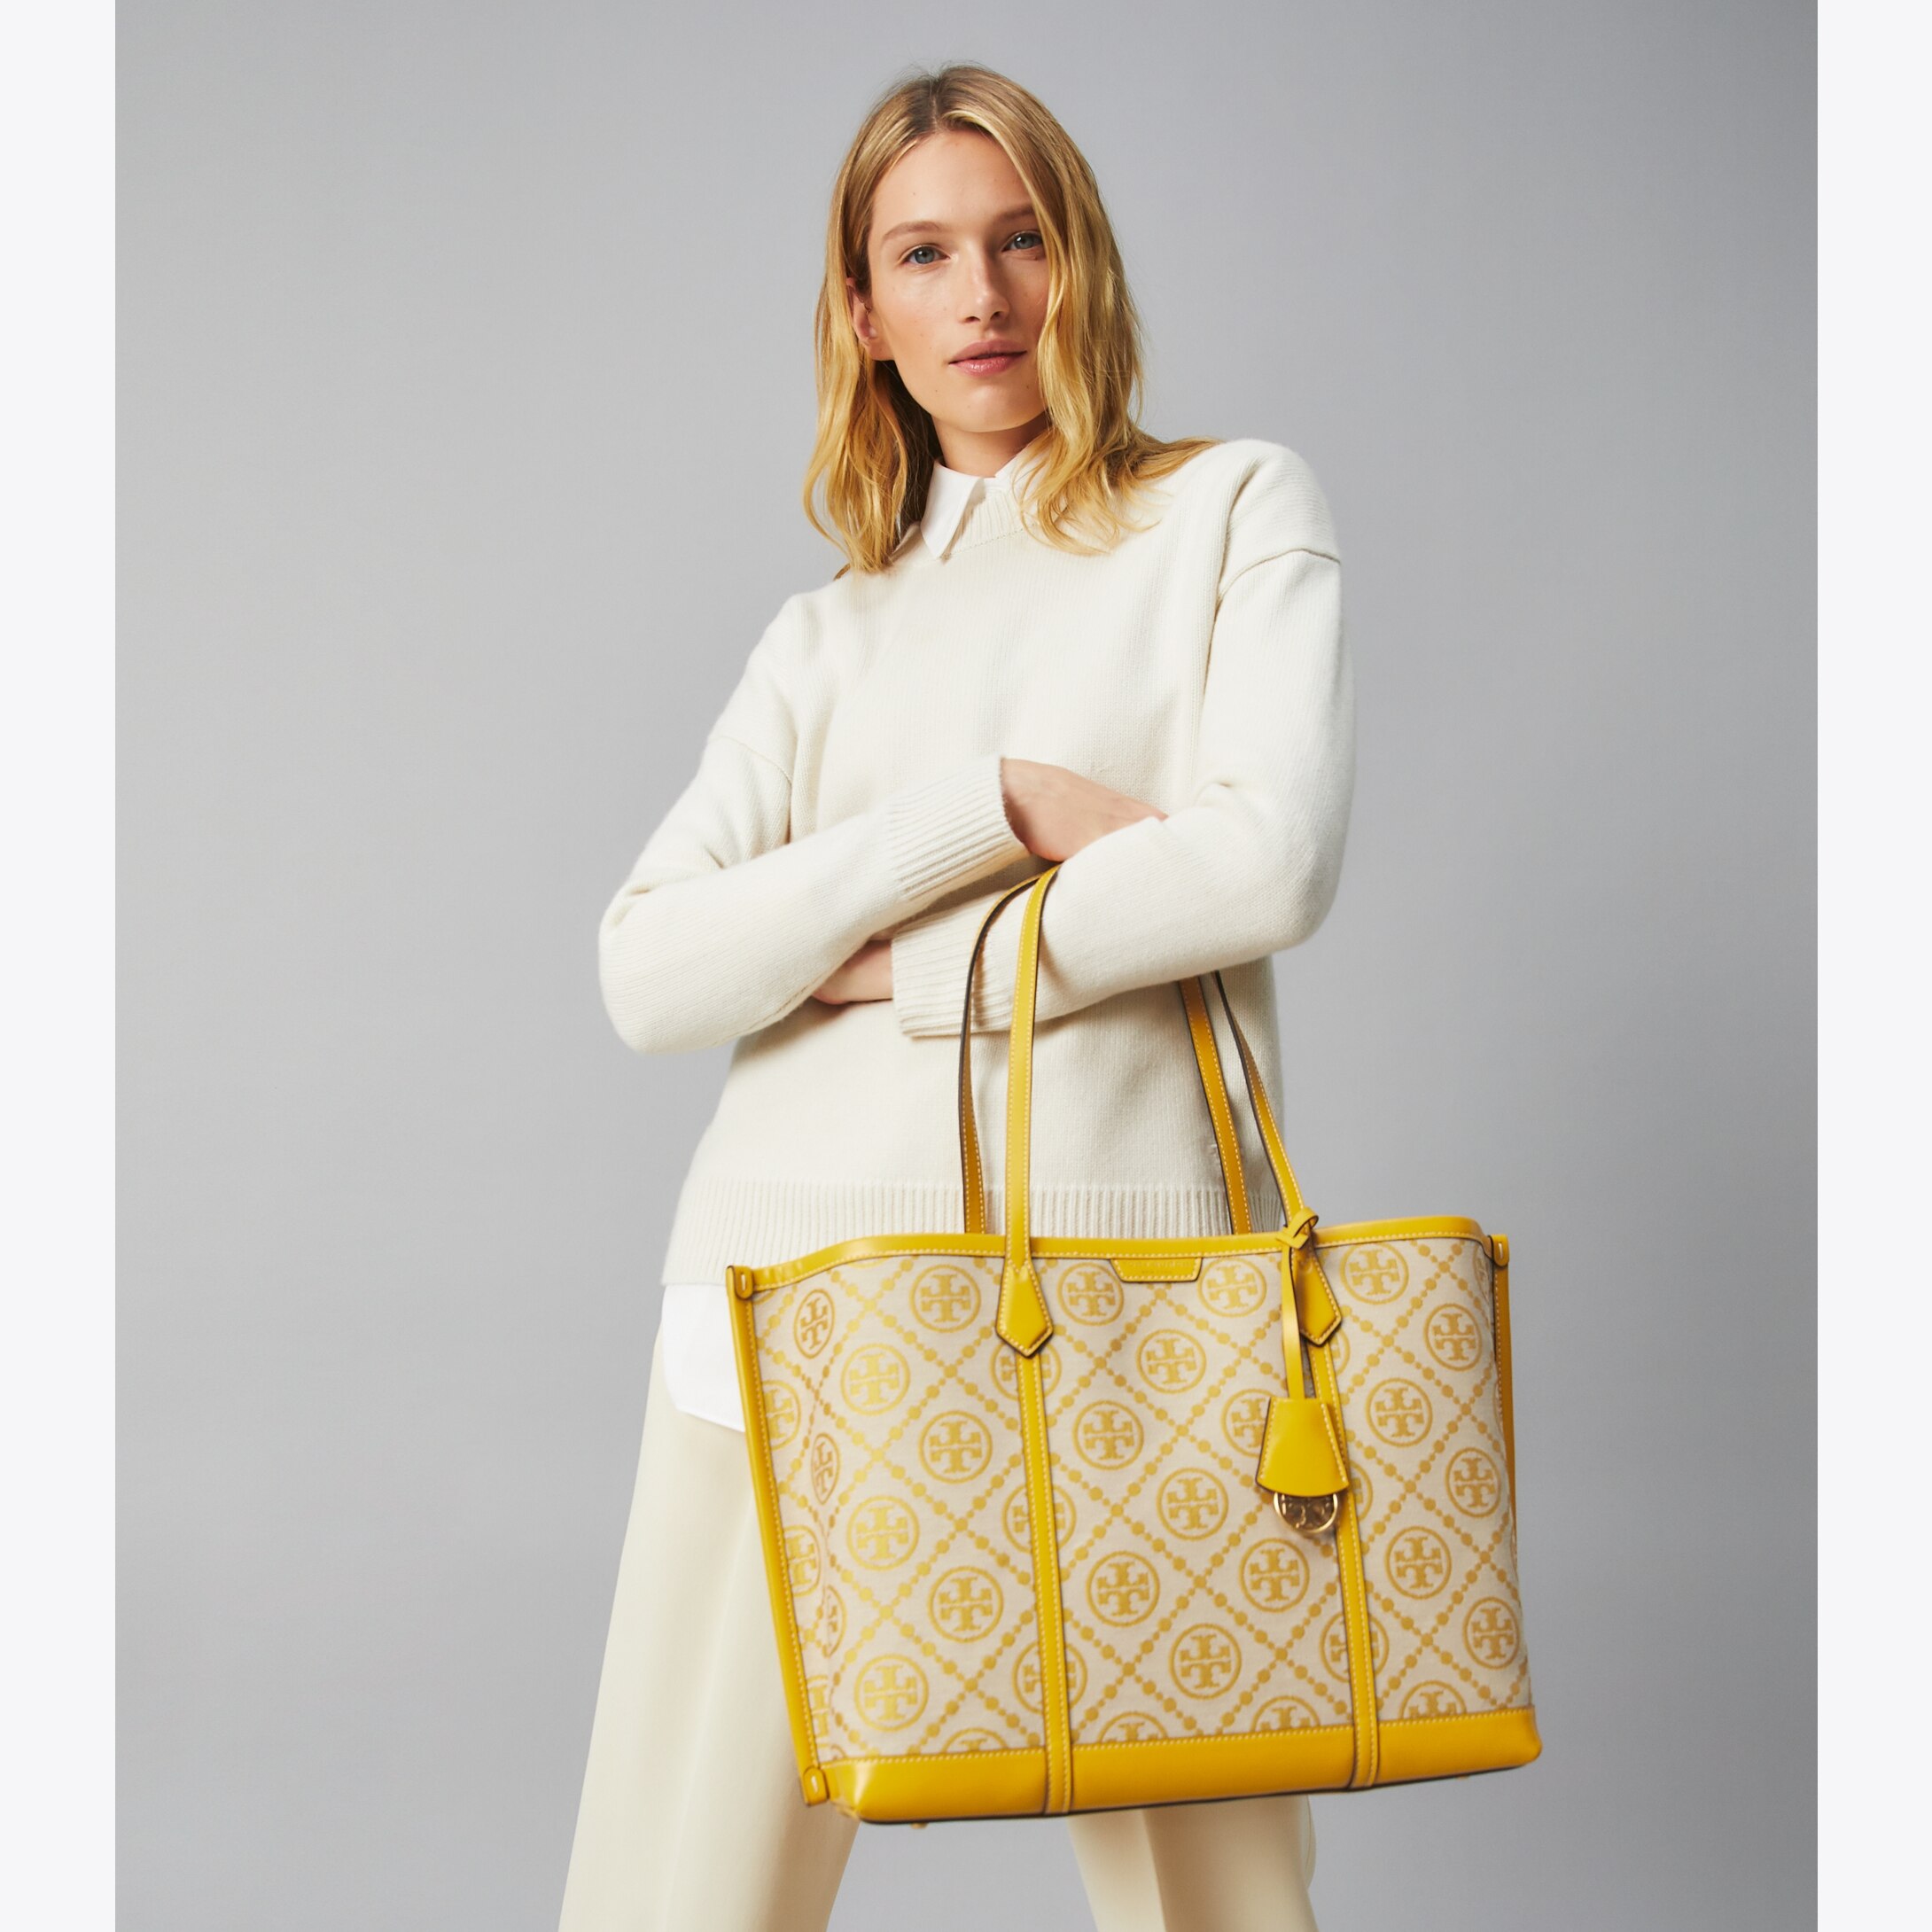 Tory Burch - Why Tory loves the T Monogram - Pynck